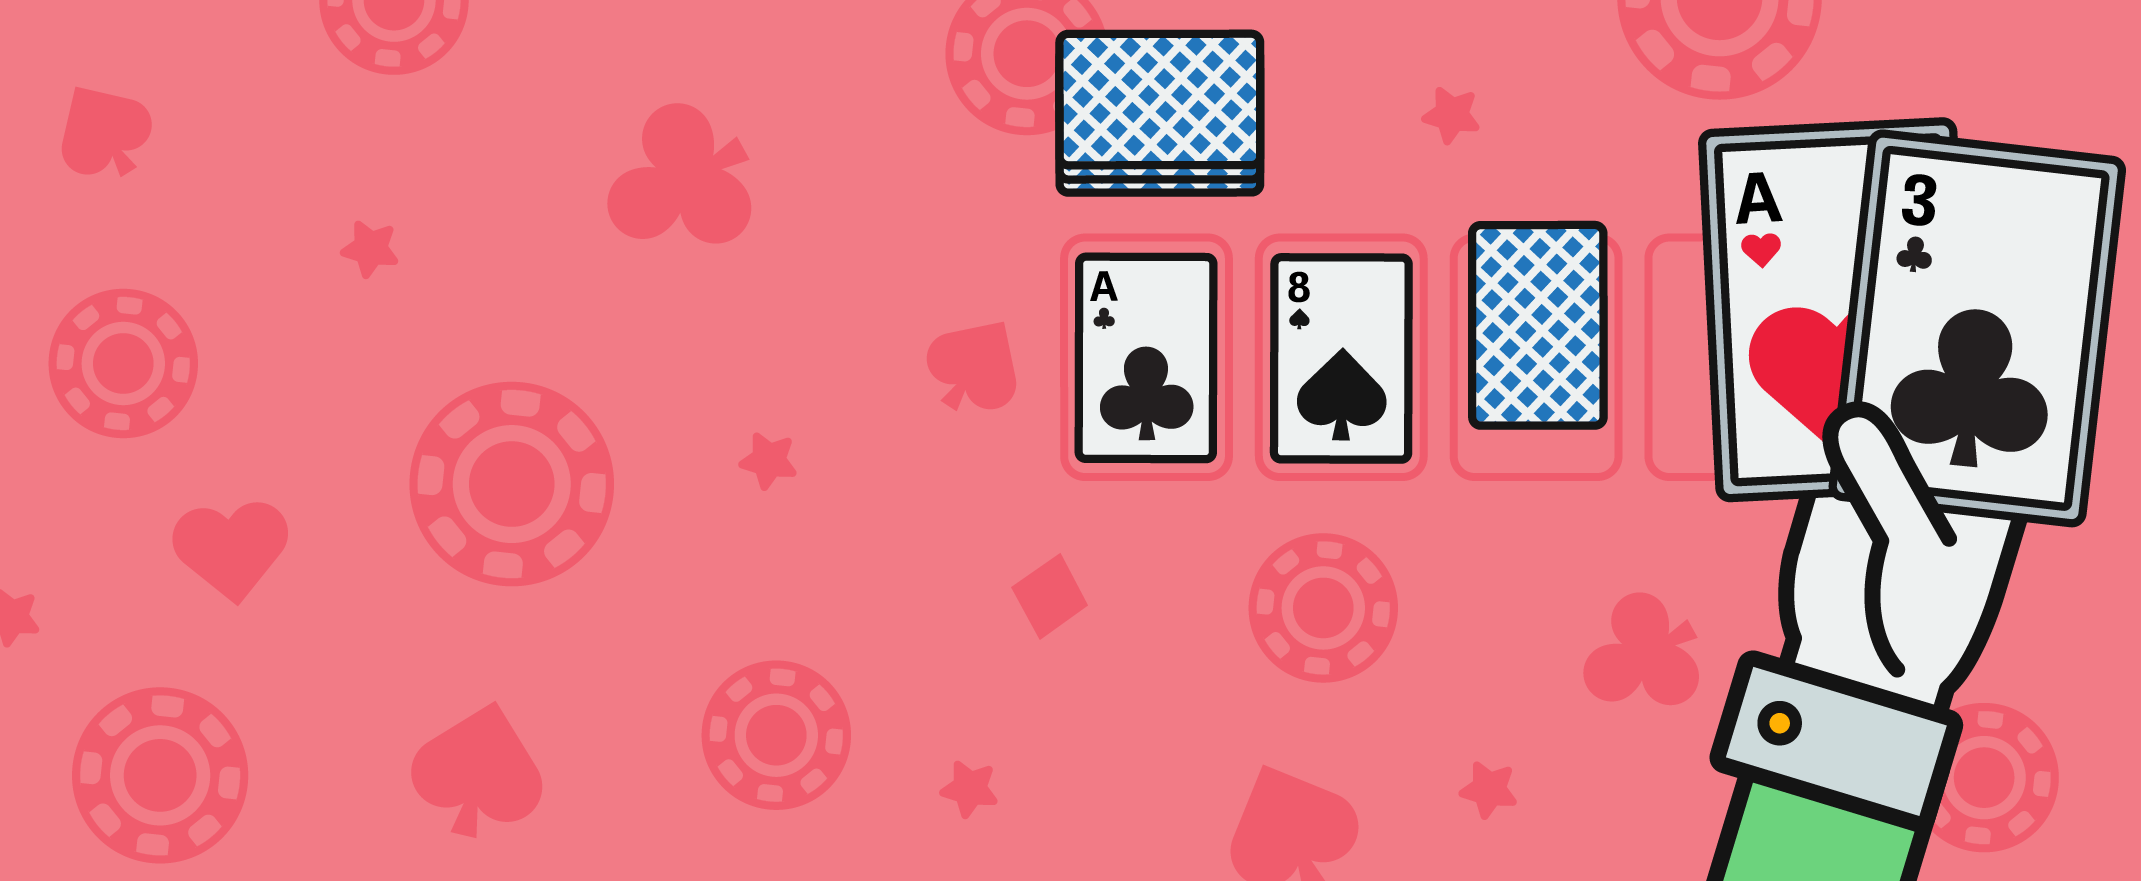 Poker guides - How to win at poker - checking your cards